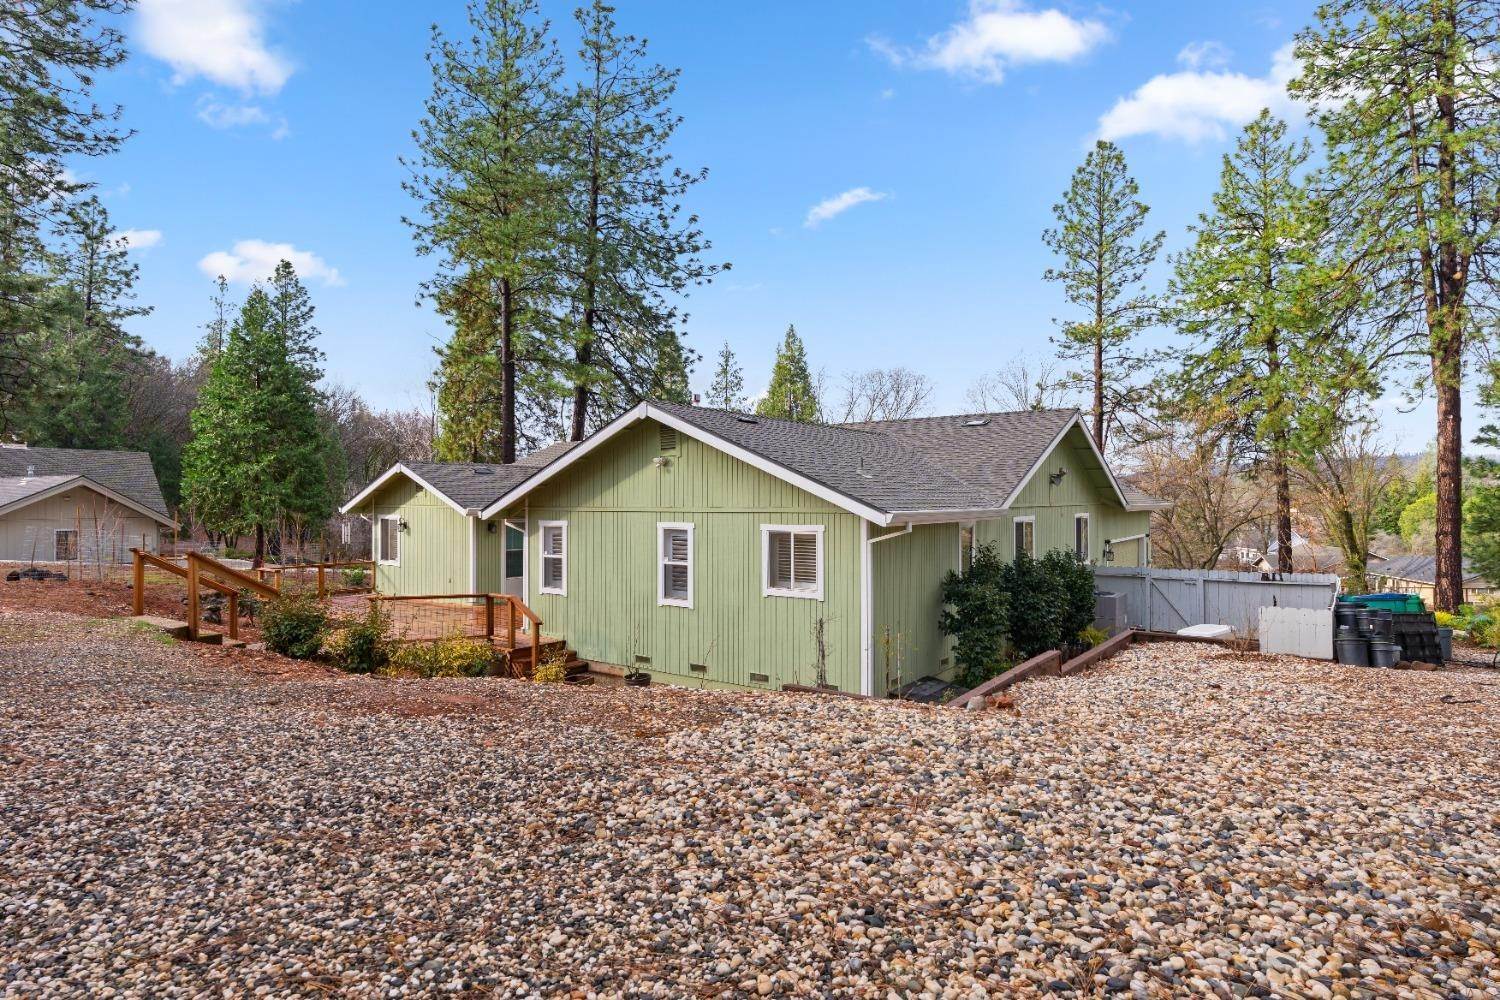 49. Single Family Homes for Active at 16967 Brandy Place Grass Valley, California 95949 United States